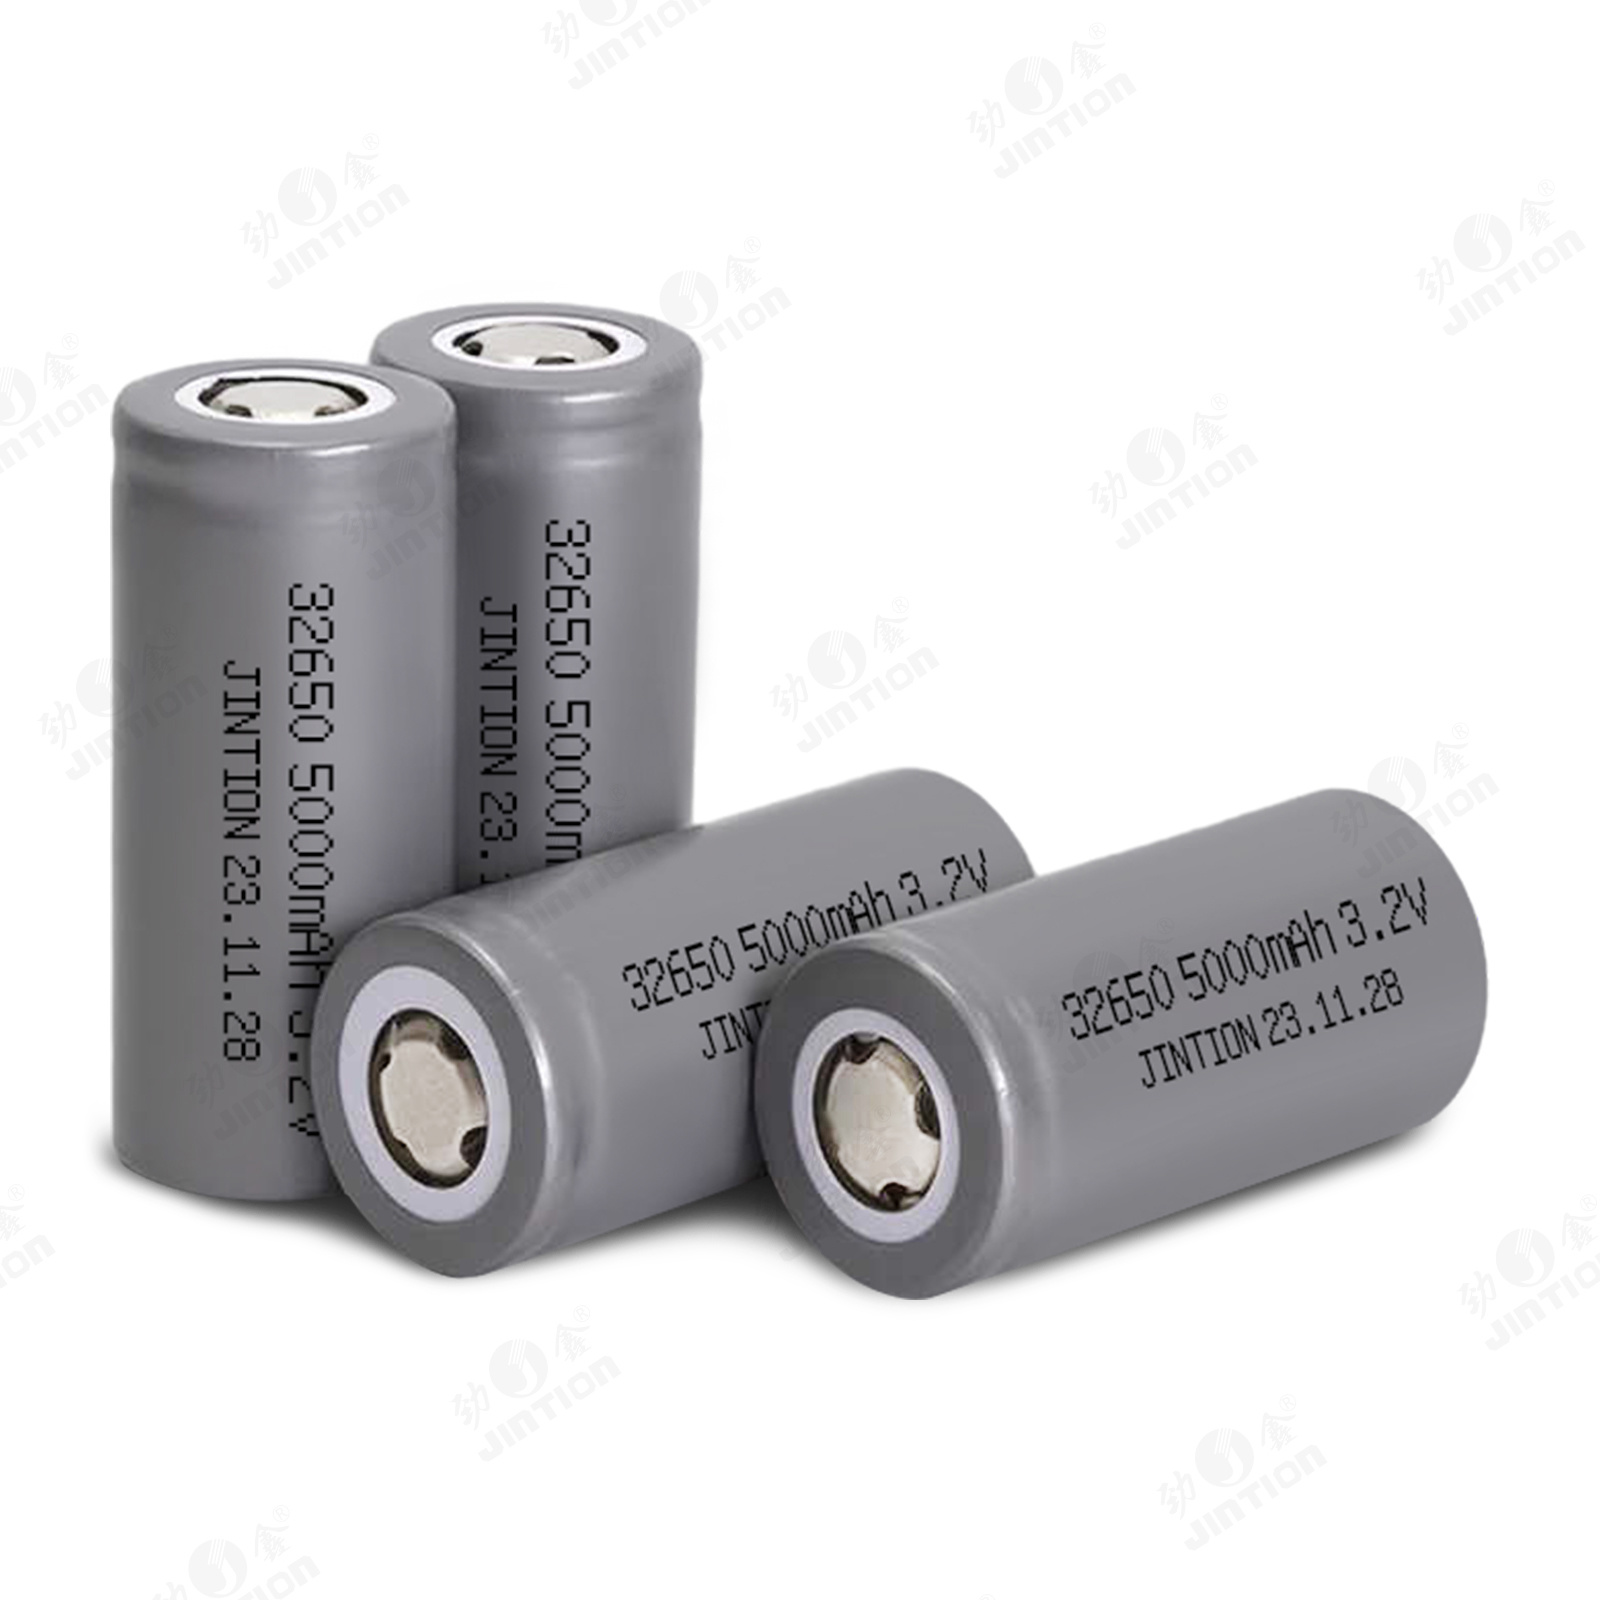 JINTION 32650 5000mah 3.2v lithium ion batteries 32650 lithium ion battery cell 32650 rechargeable ifr32650 lfp 32700